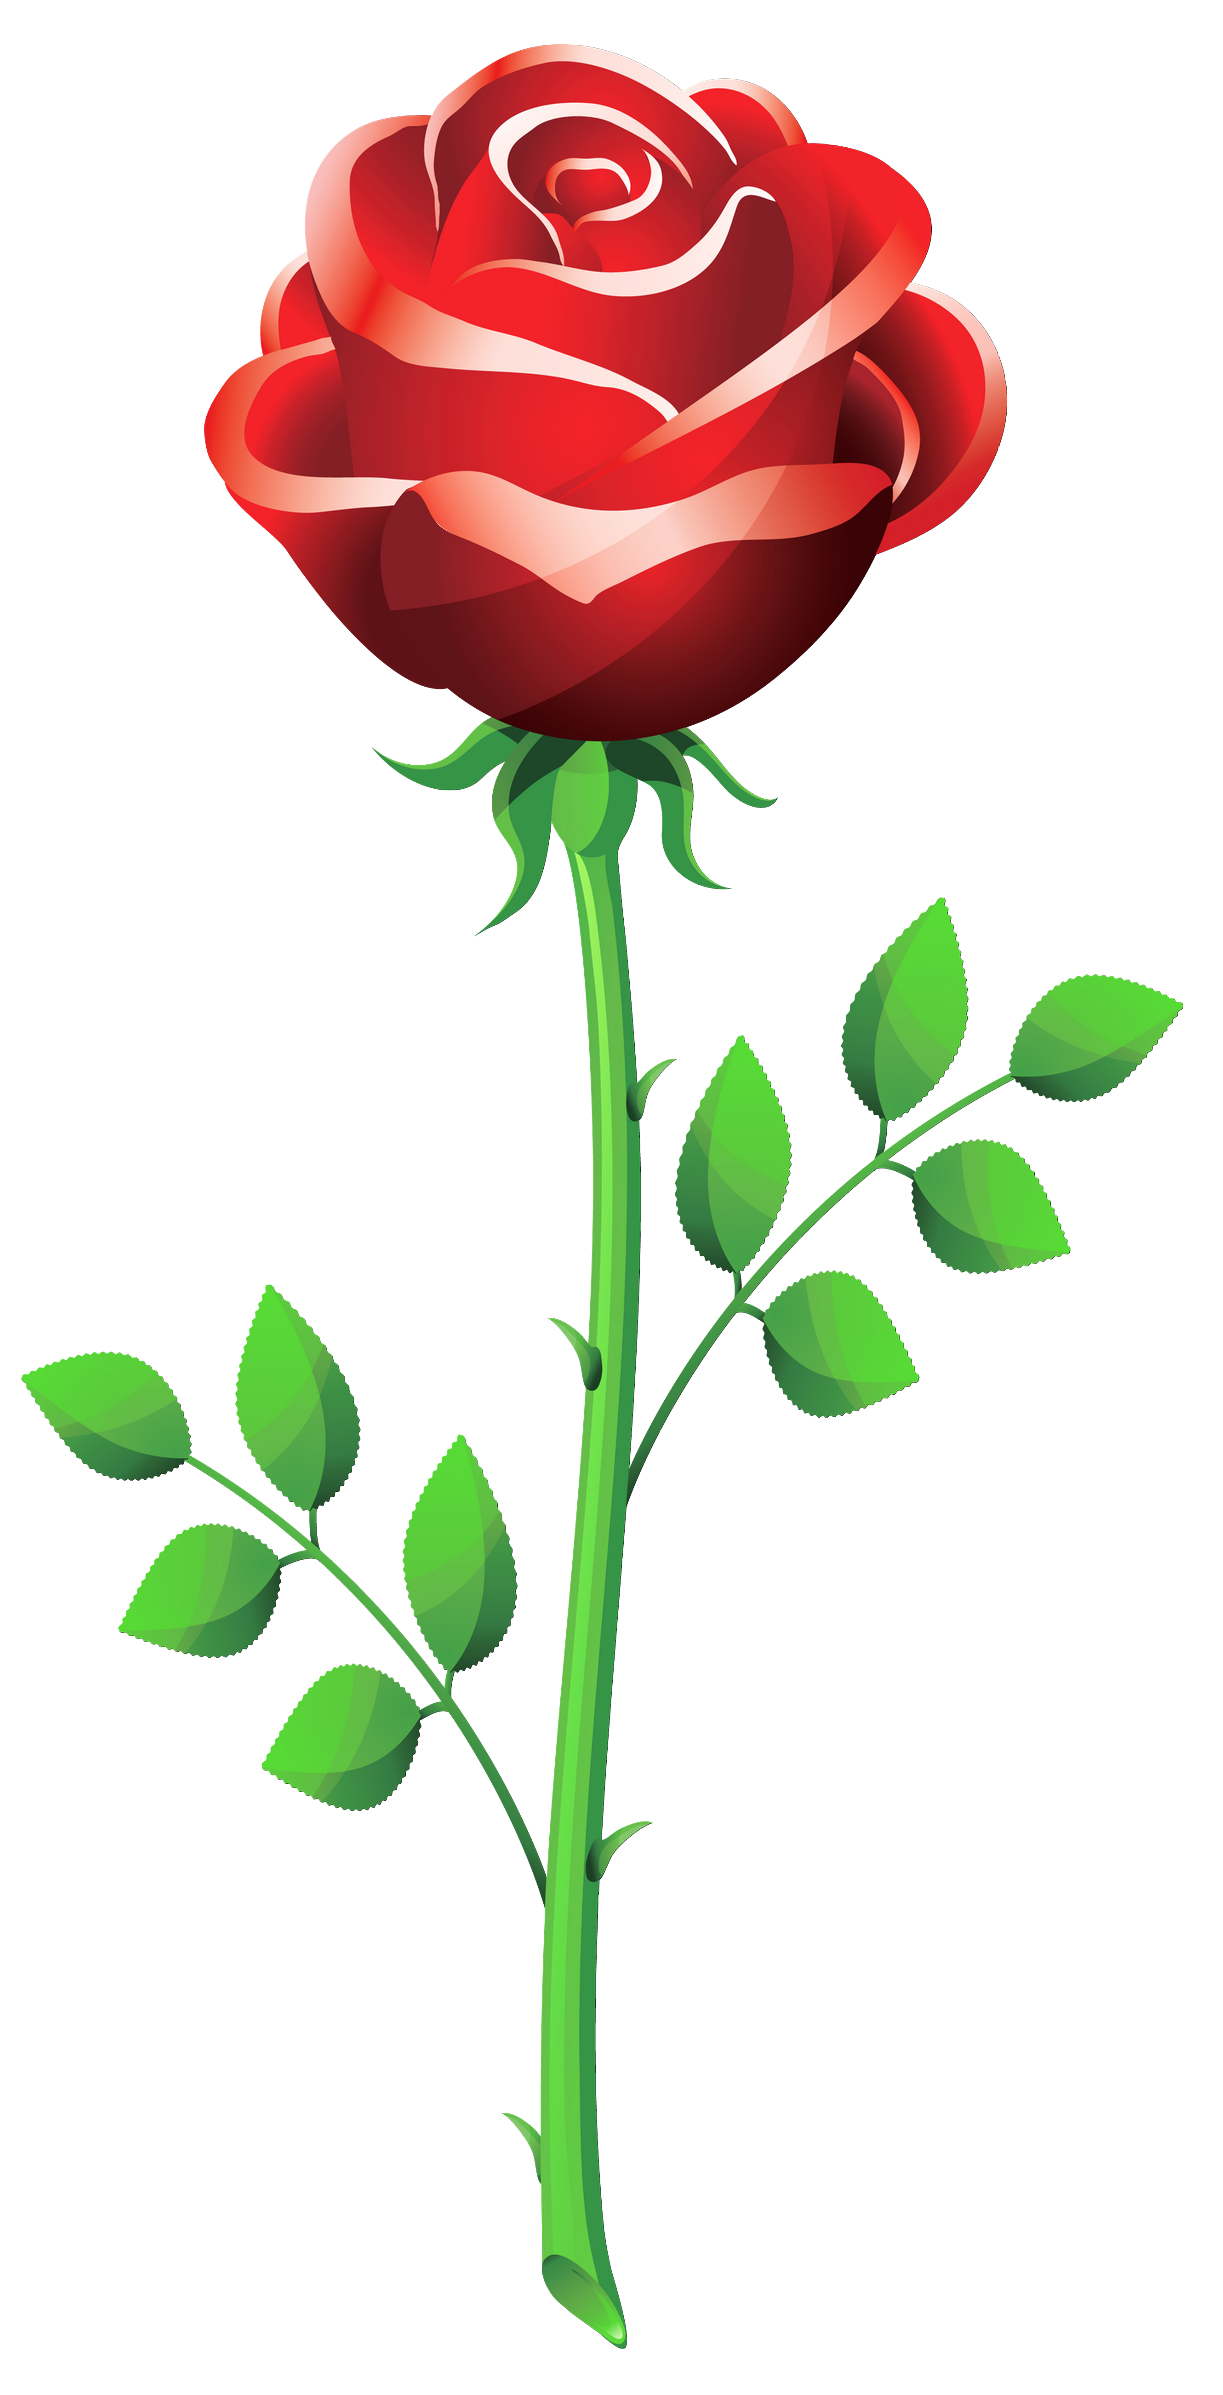 Valentines Day Roses PNG Image Background